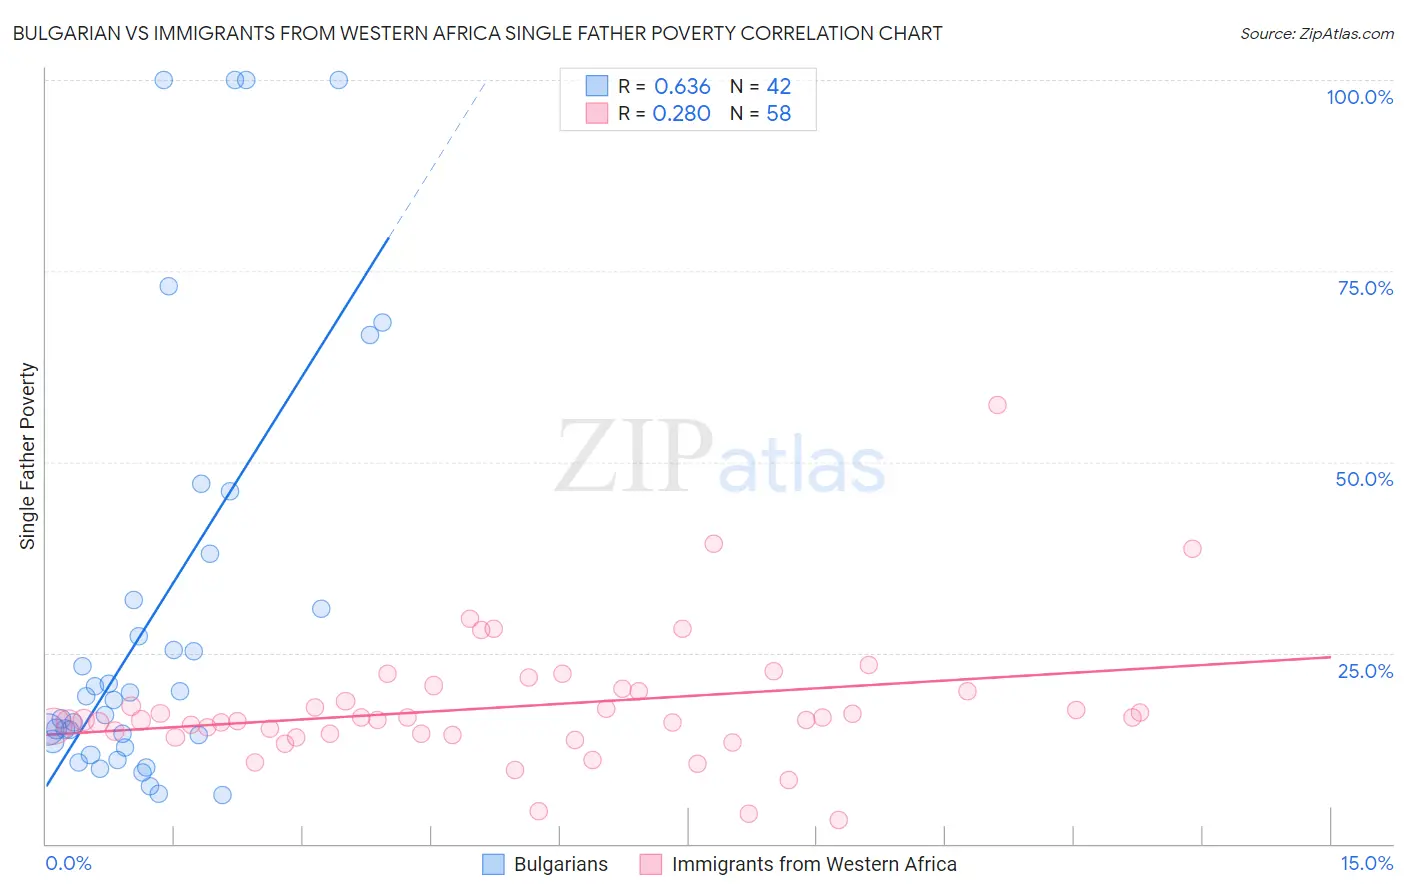 Bulgarian vs Immigrants from Western Africa Single Father Poverty